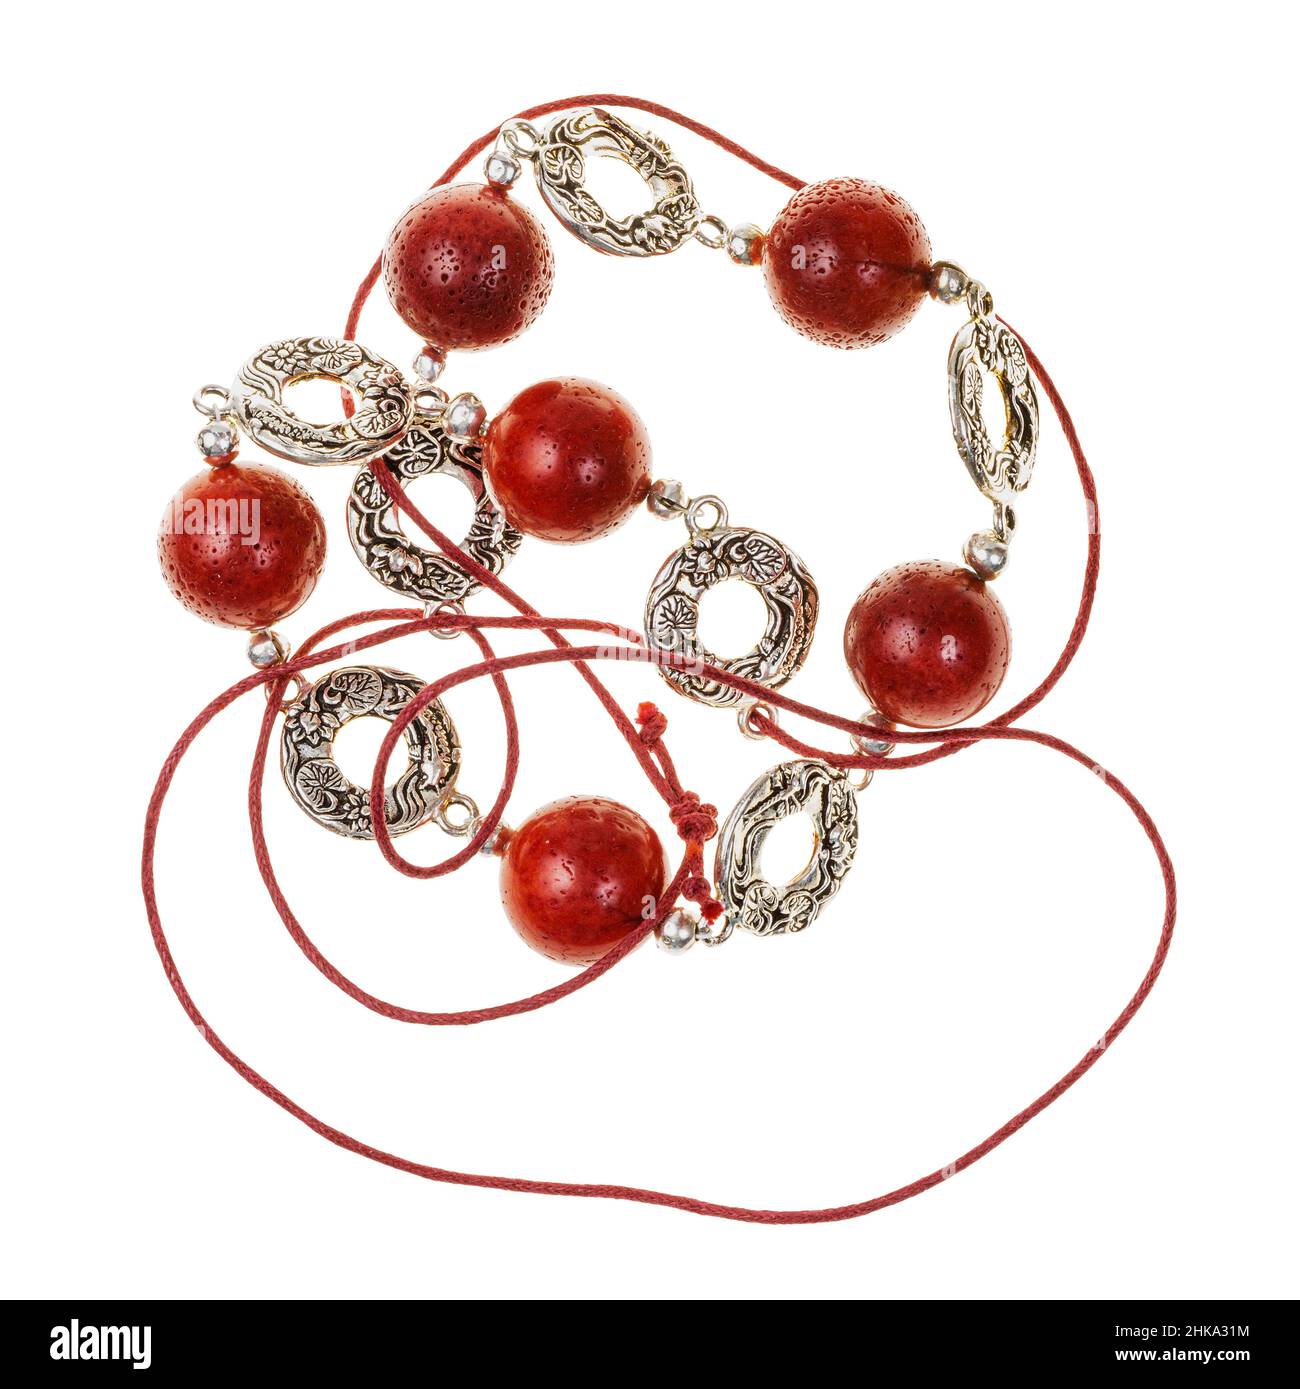 tangled handcrafted necklace of polished red coral balls and decorated silver rings on red leather cord isolated on white backhround Stock Photo